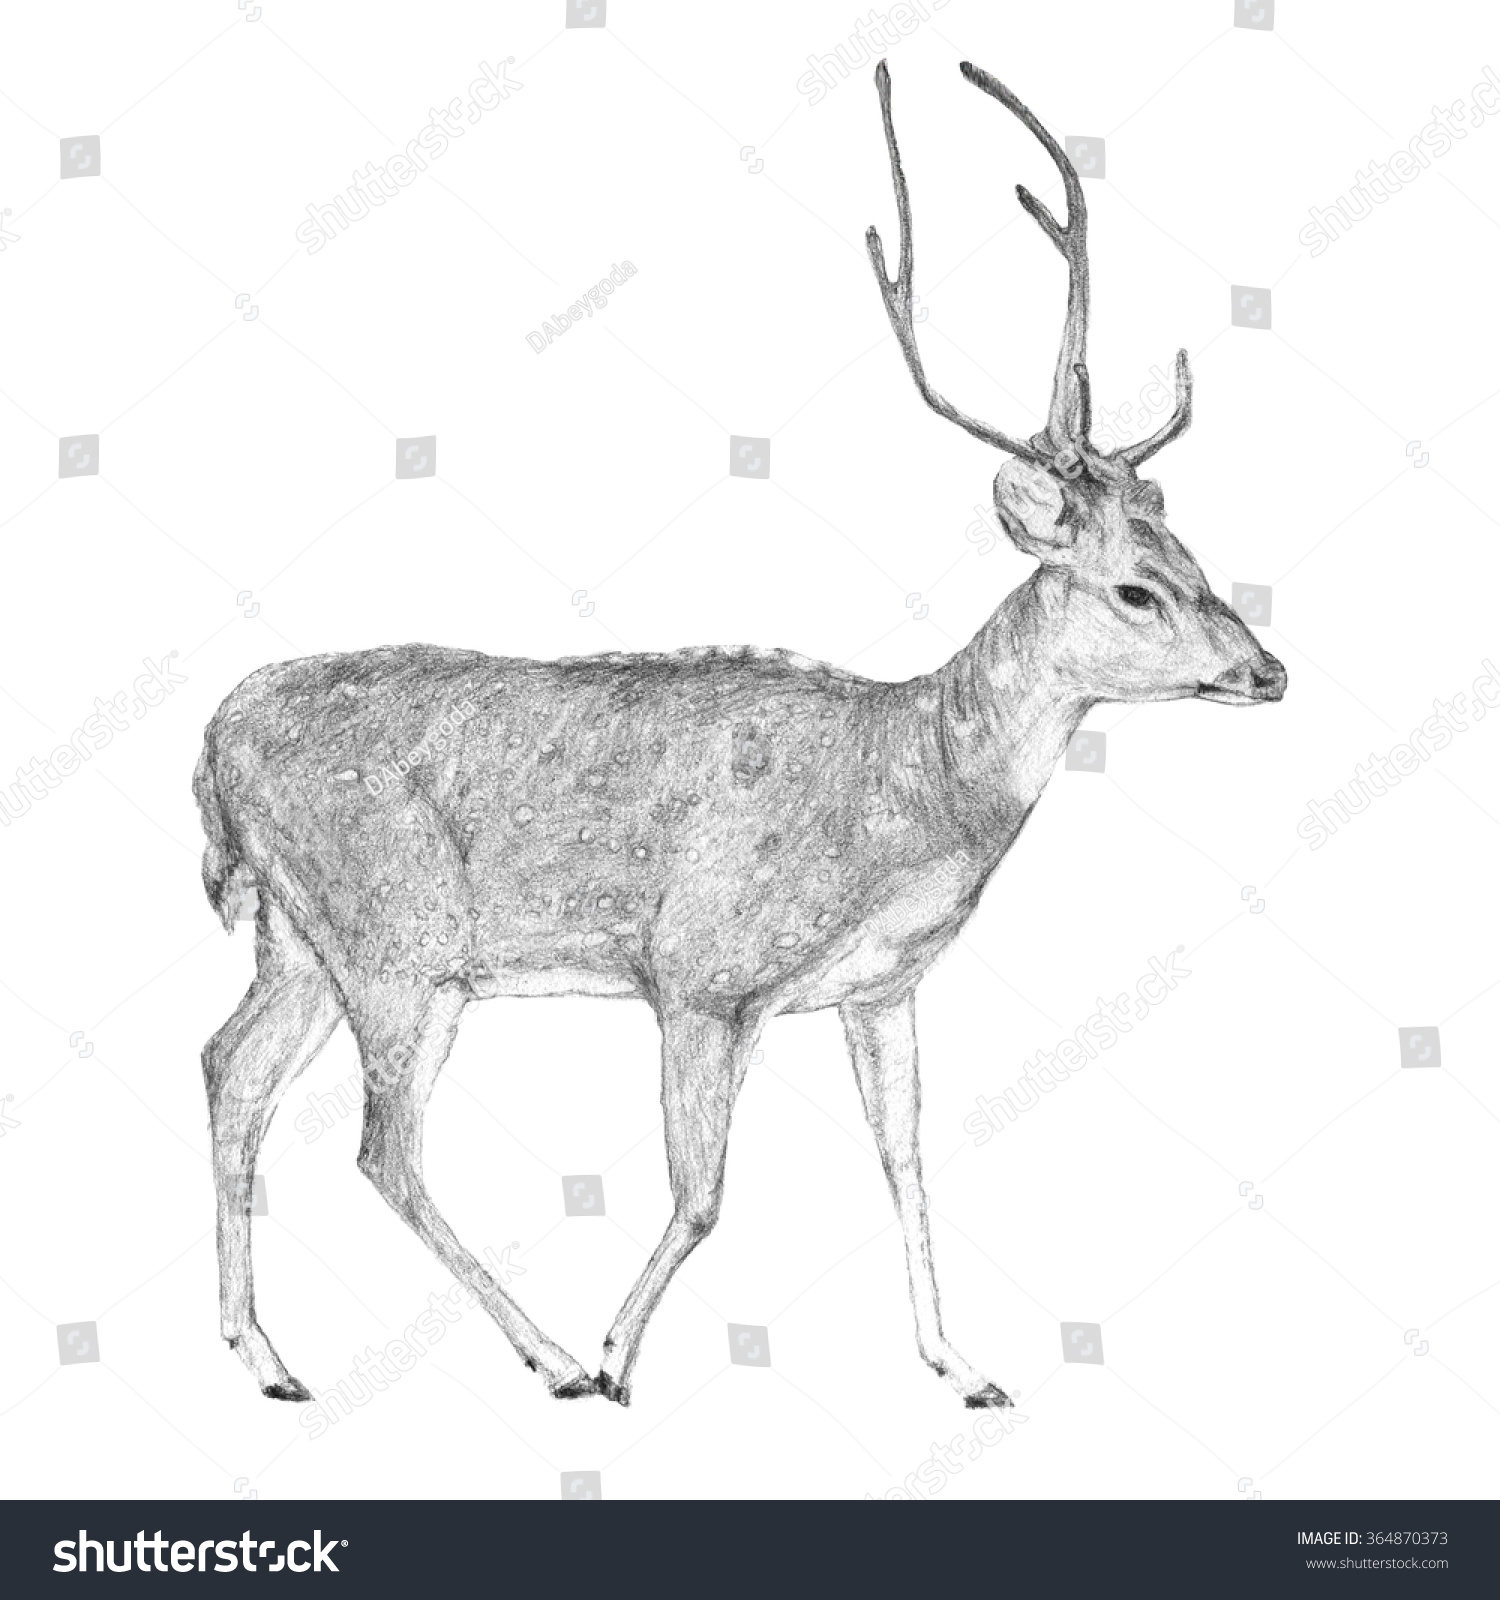 Male Deer Side View Illustration. Greyscale, Black And White Pencil